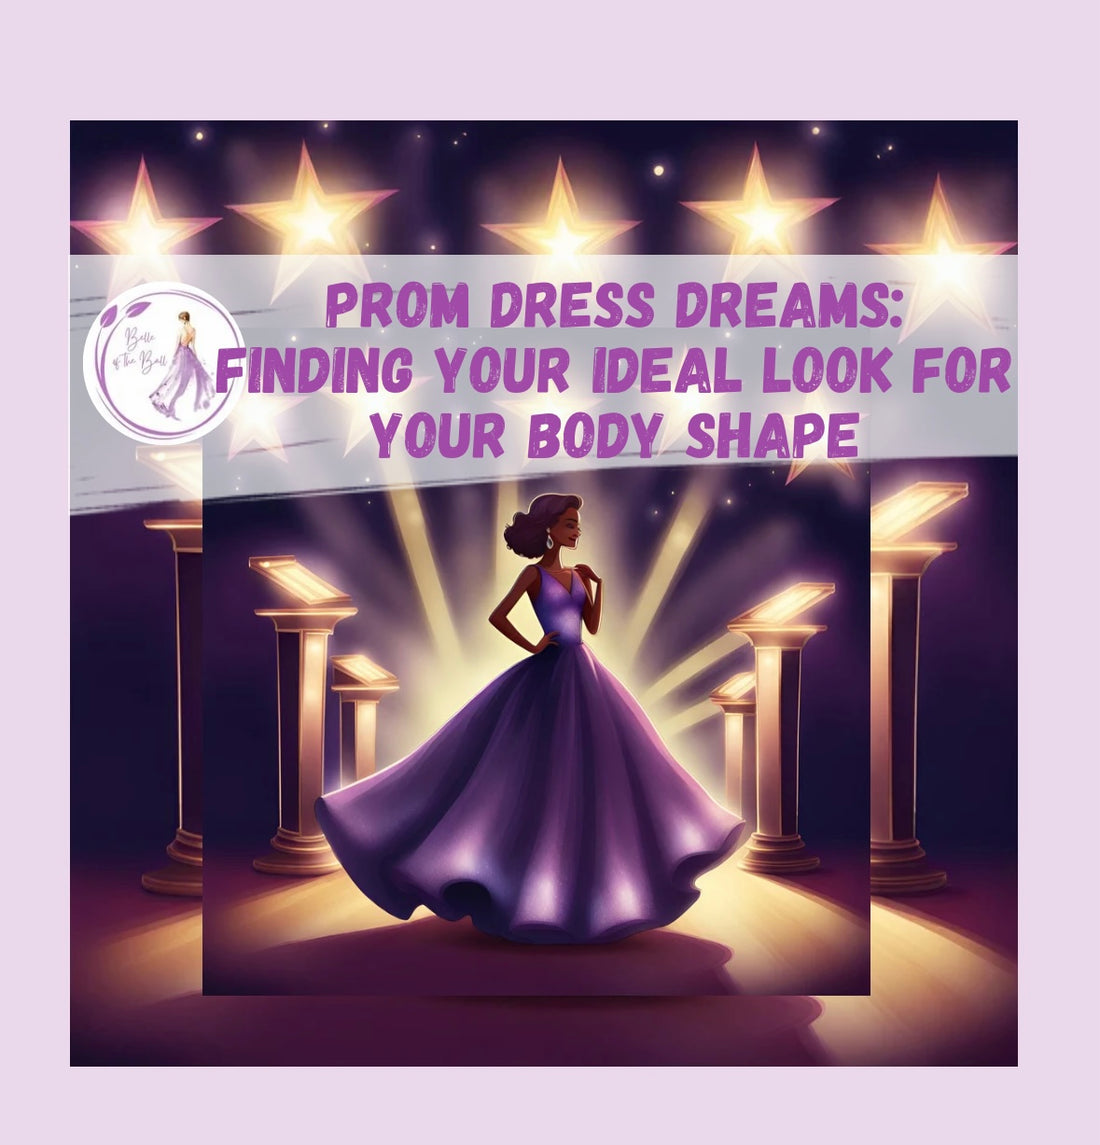 Ball Dress Dreams: Finding your Ideal Look for your Body Shape